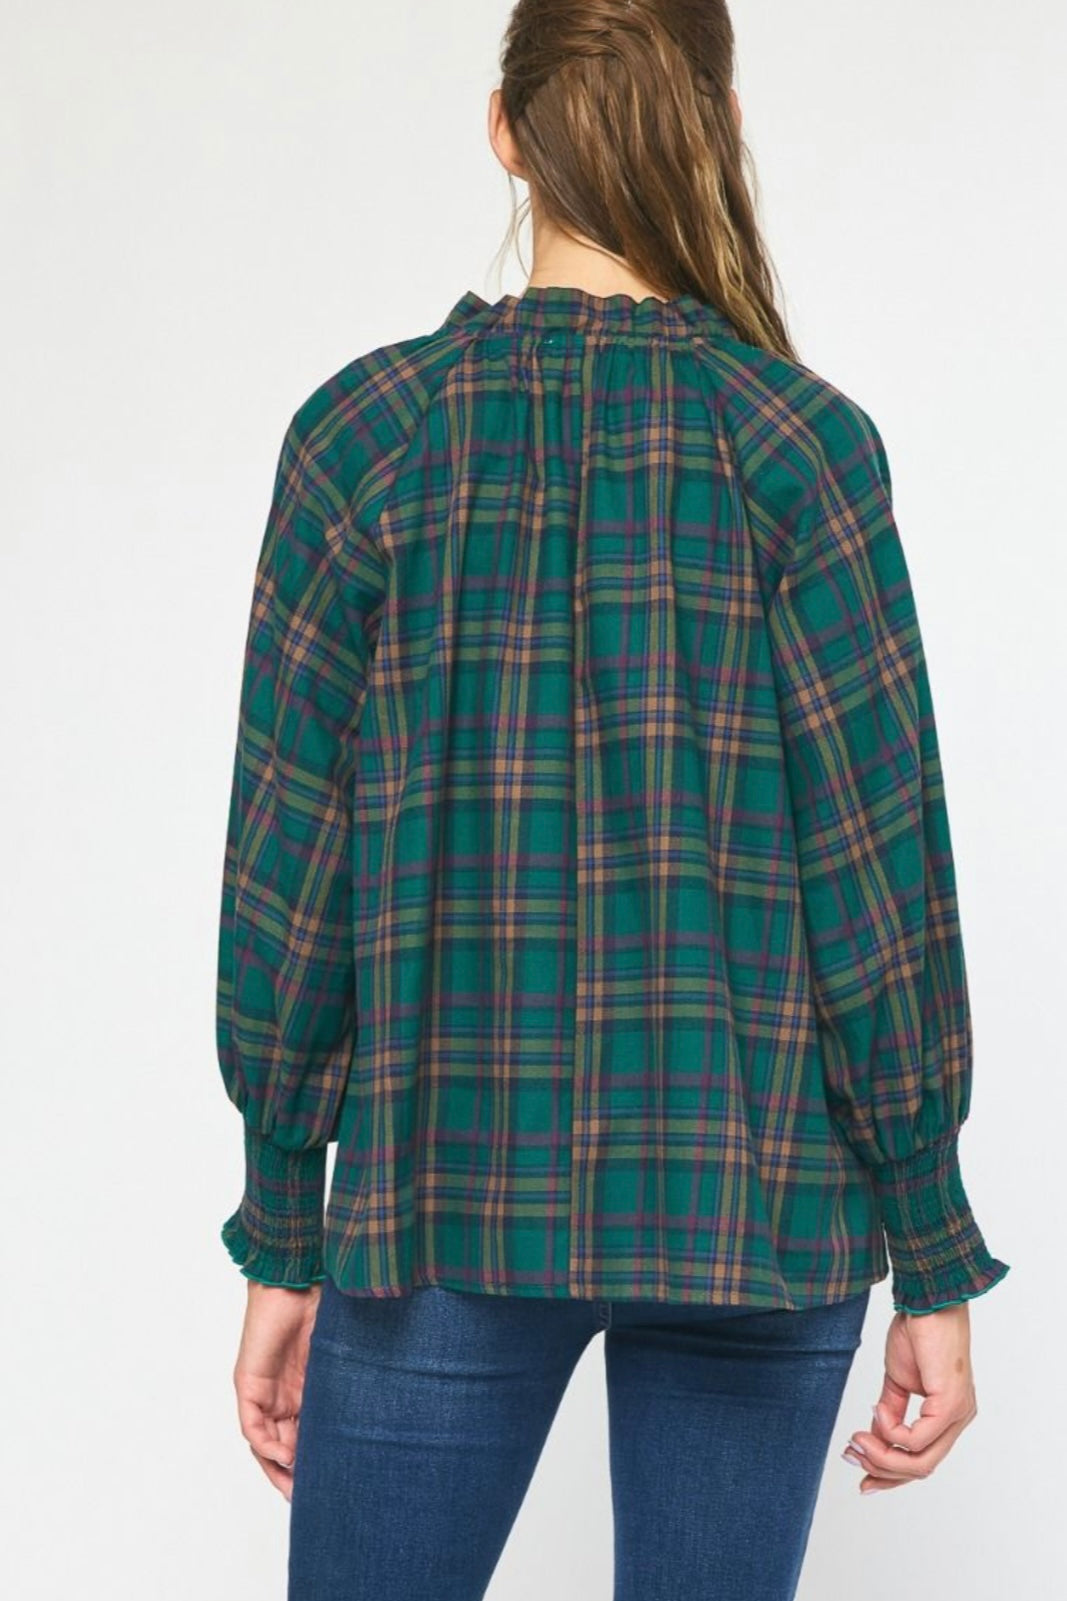 The Greenhouse Plaid Top